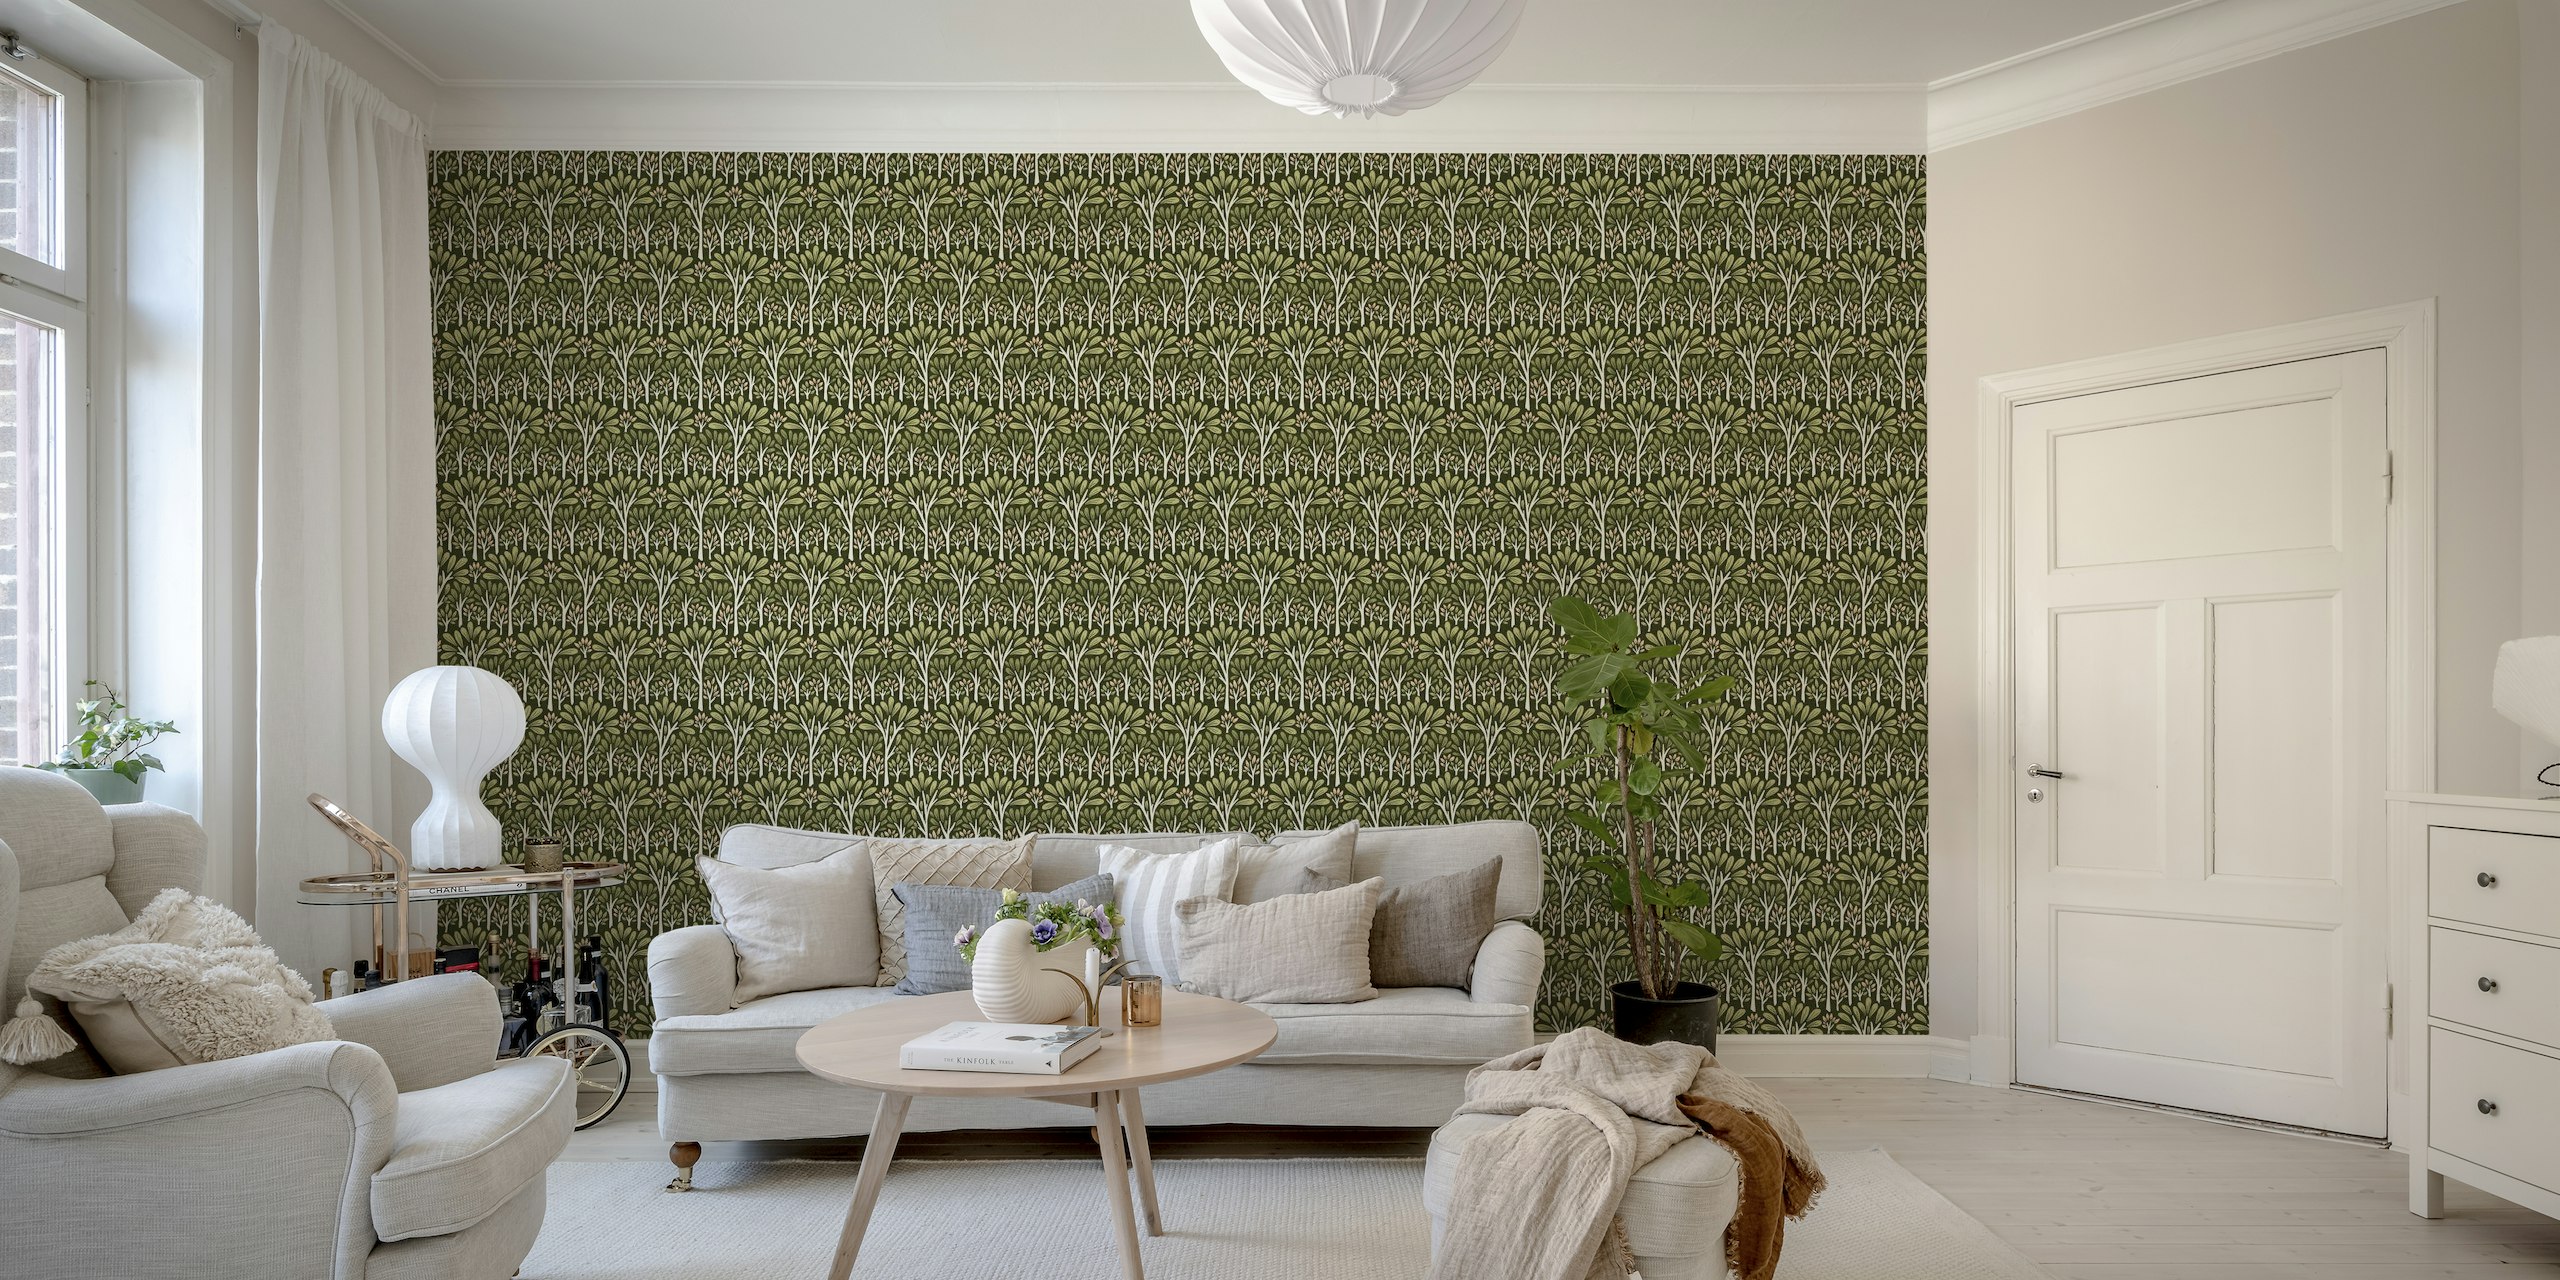 Dark botanical patterned wall mural featuring stylized trees and foliage